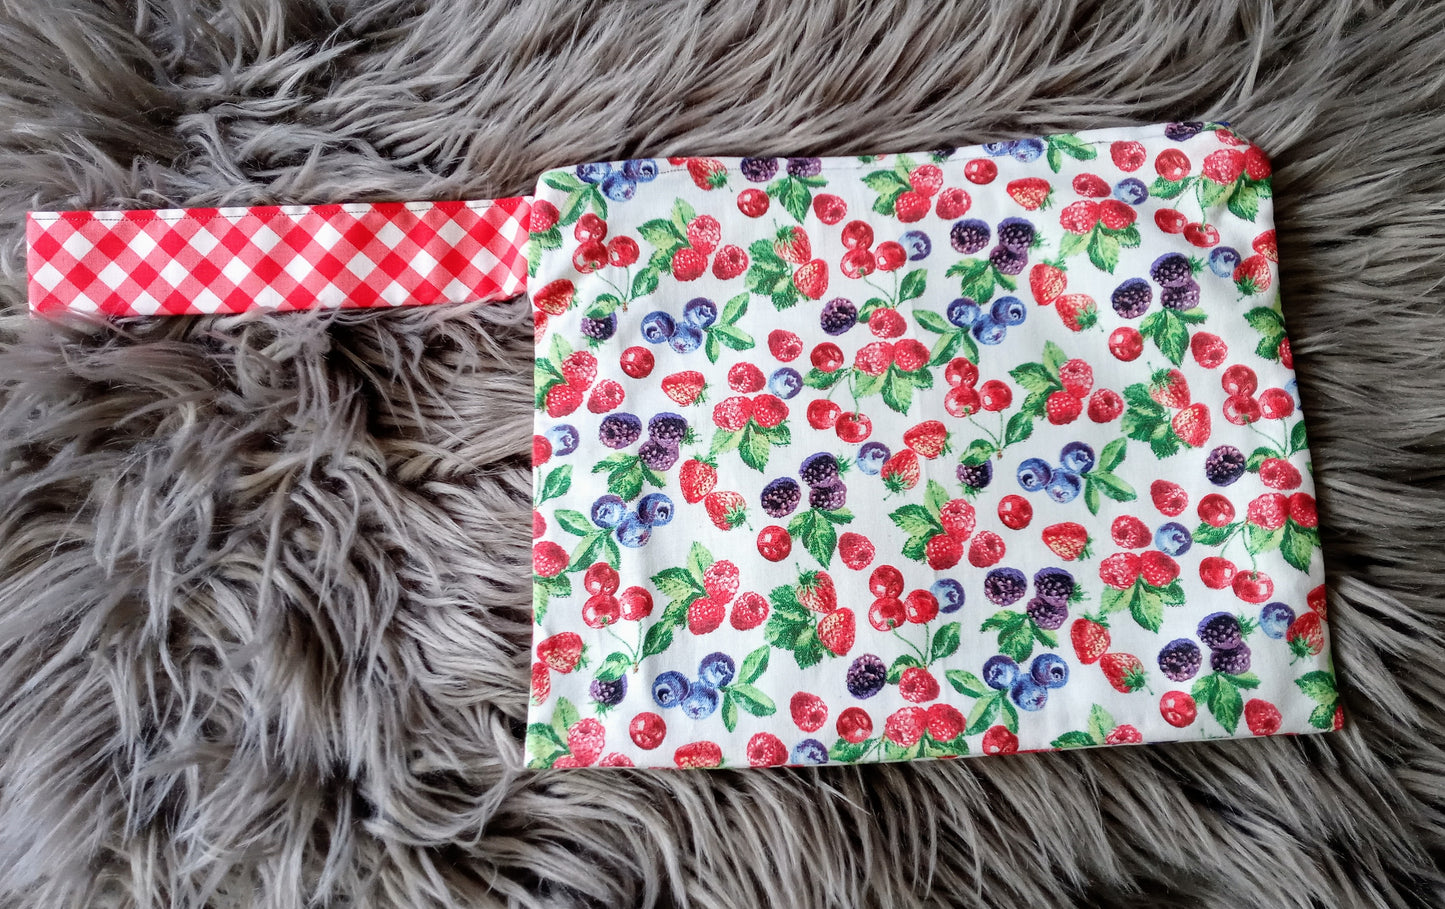 Fruit Stand / Berries (Farmers Market) Pouch